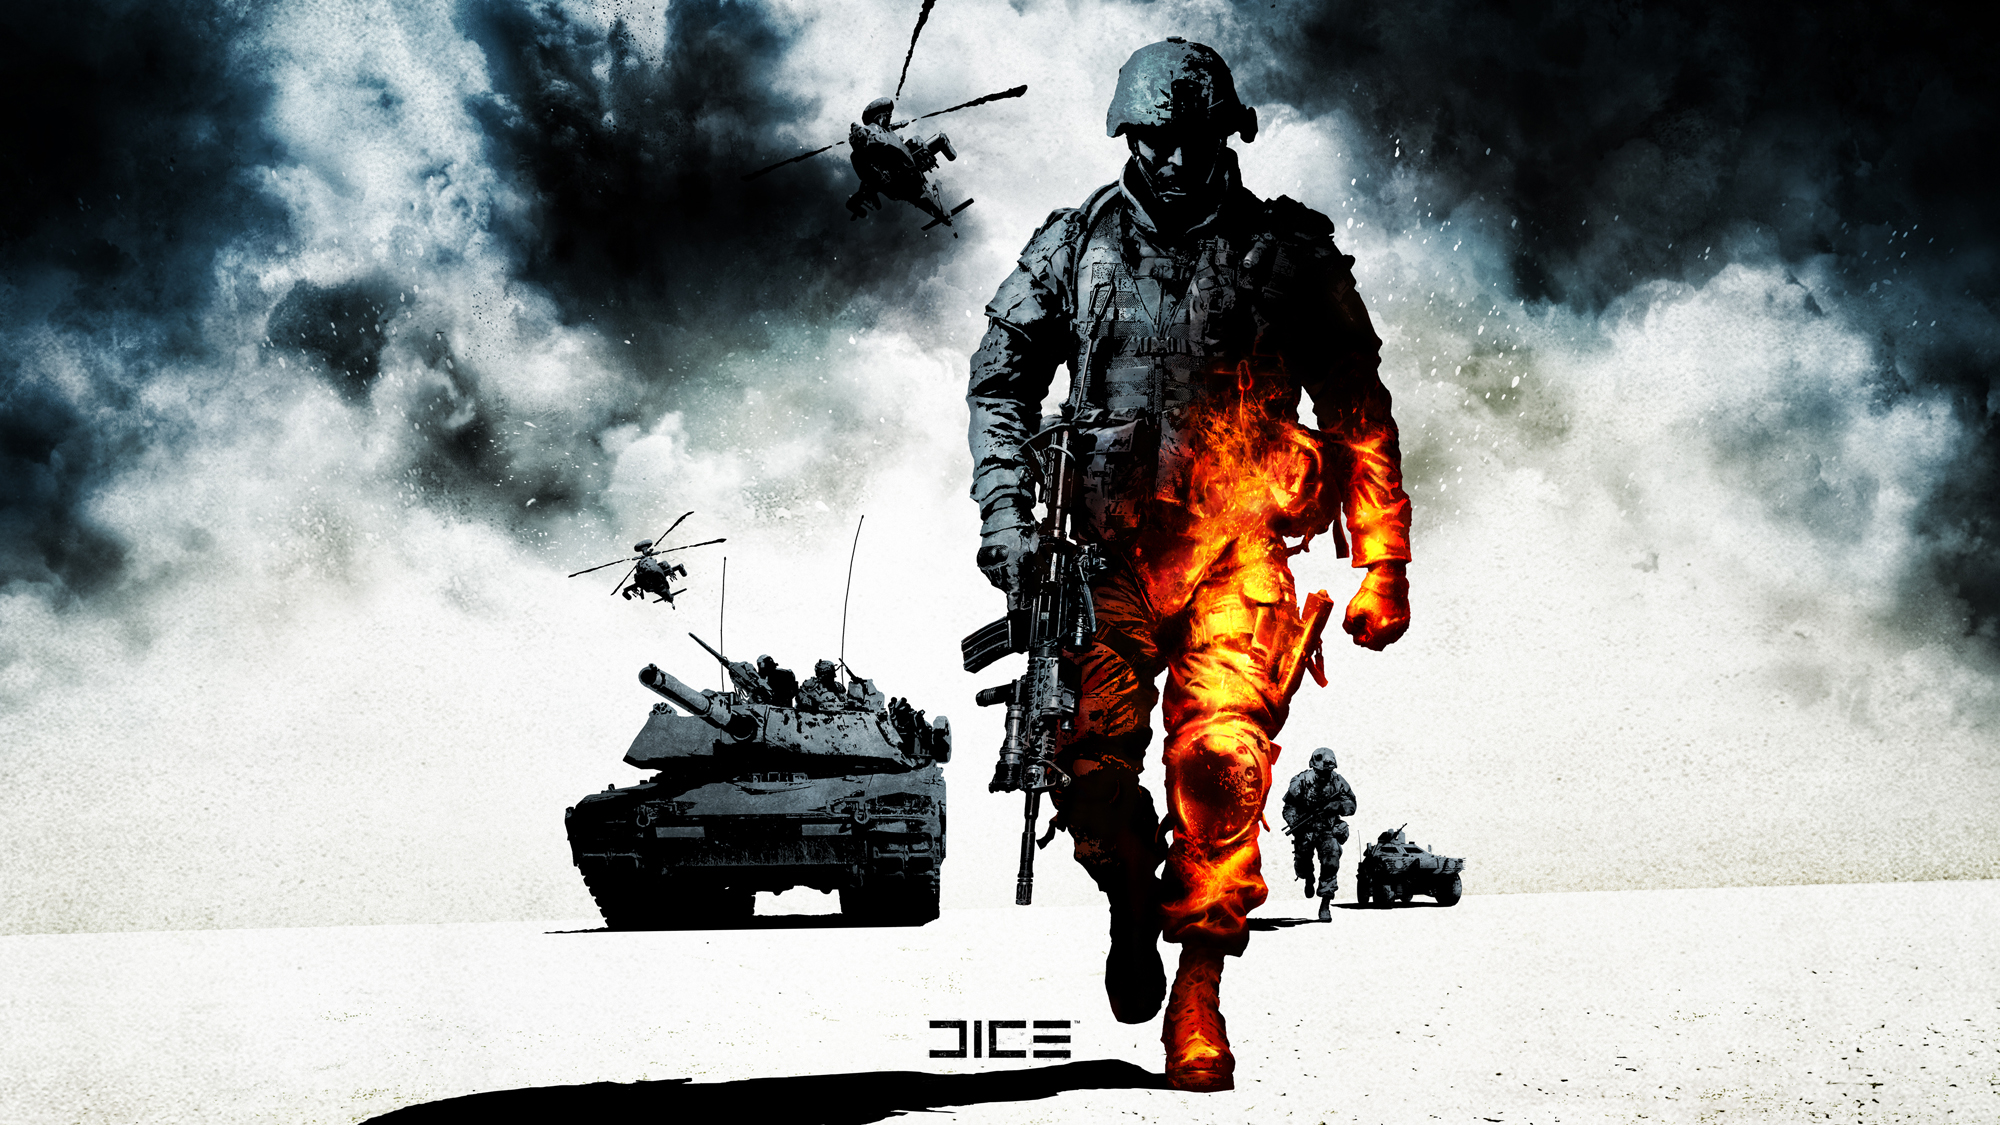 Humor Made Battlefield Bad Pany A Niche Title Says Dice